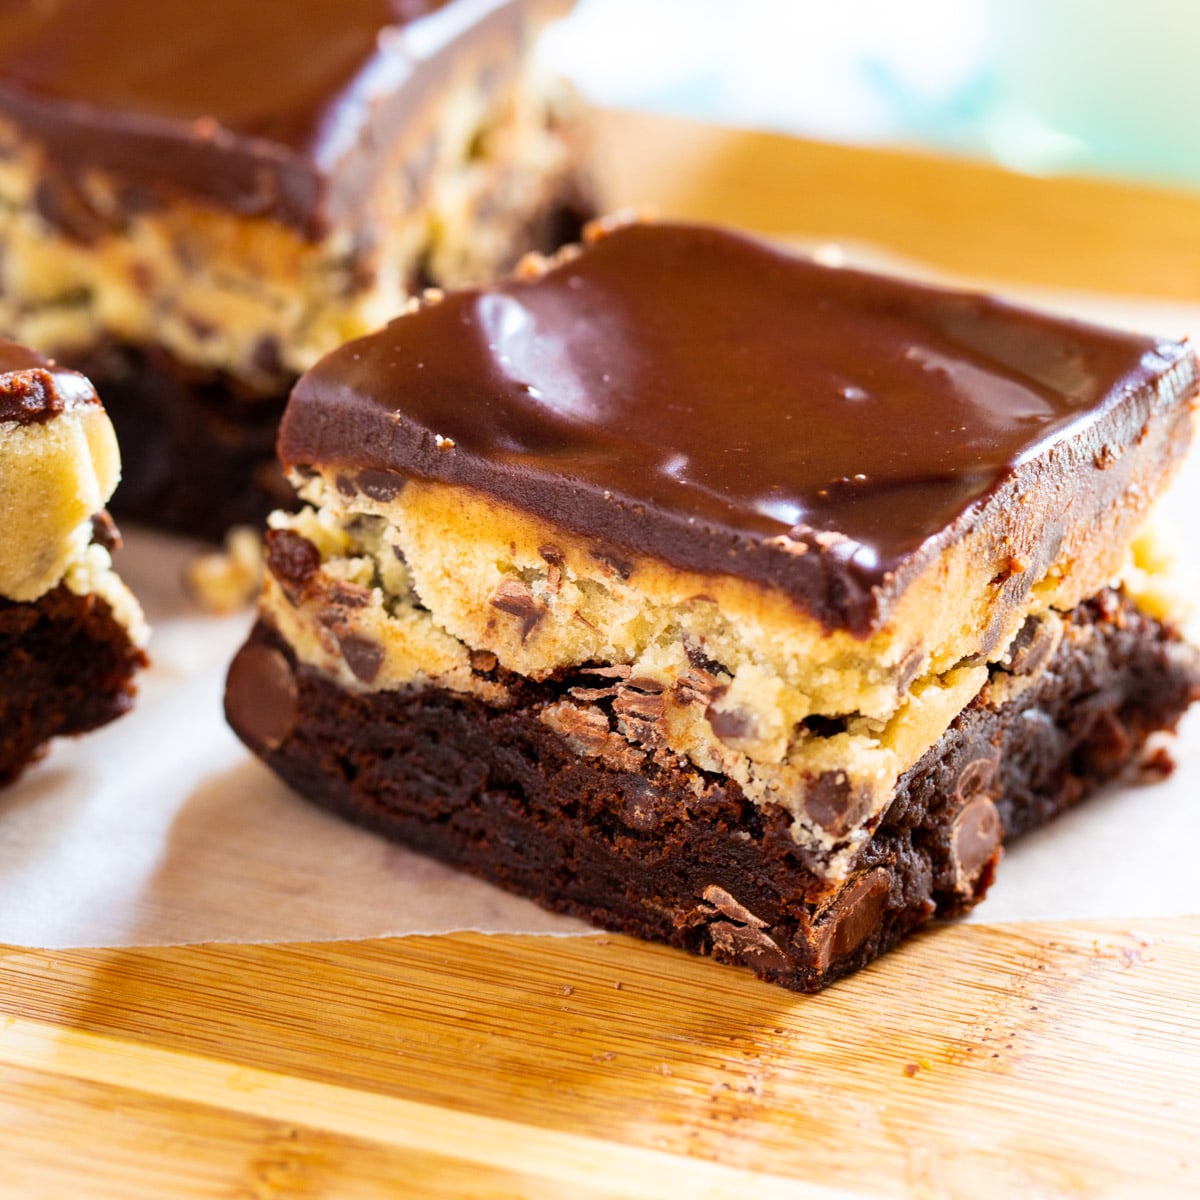 Cookie Dough Brownies on wooden cutting board.